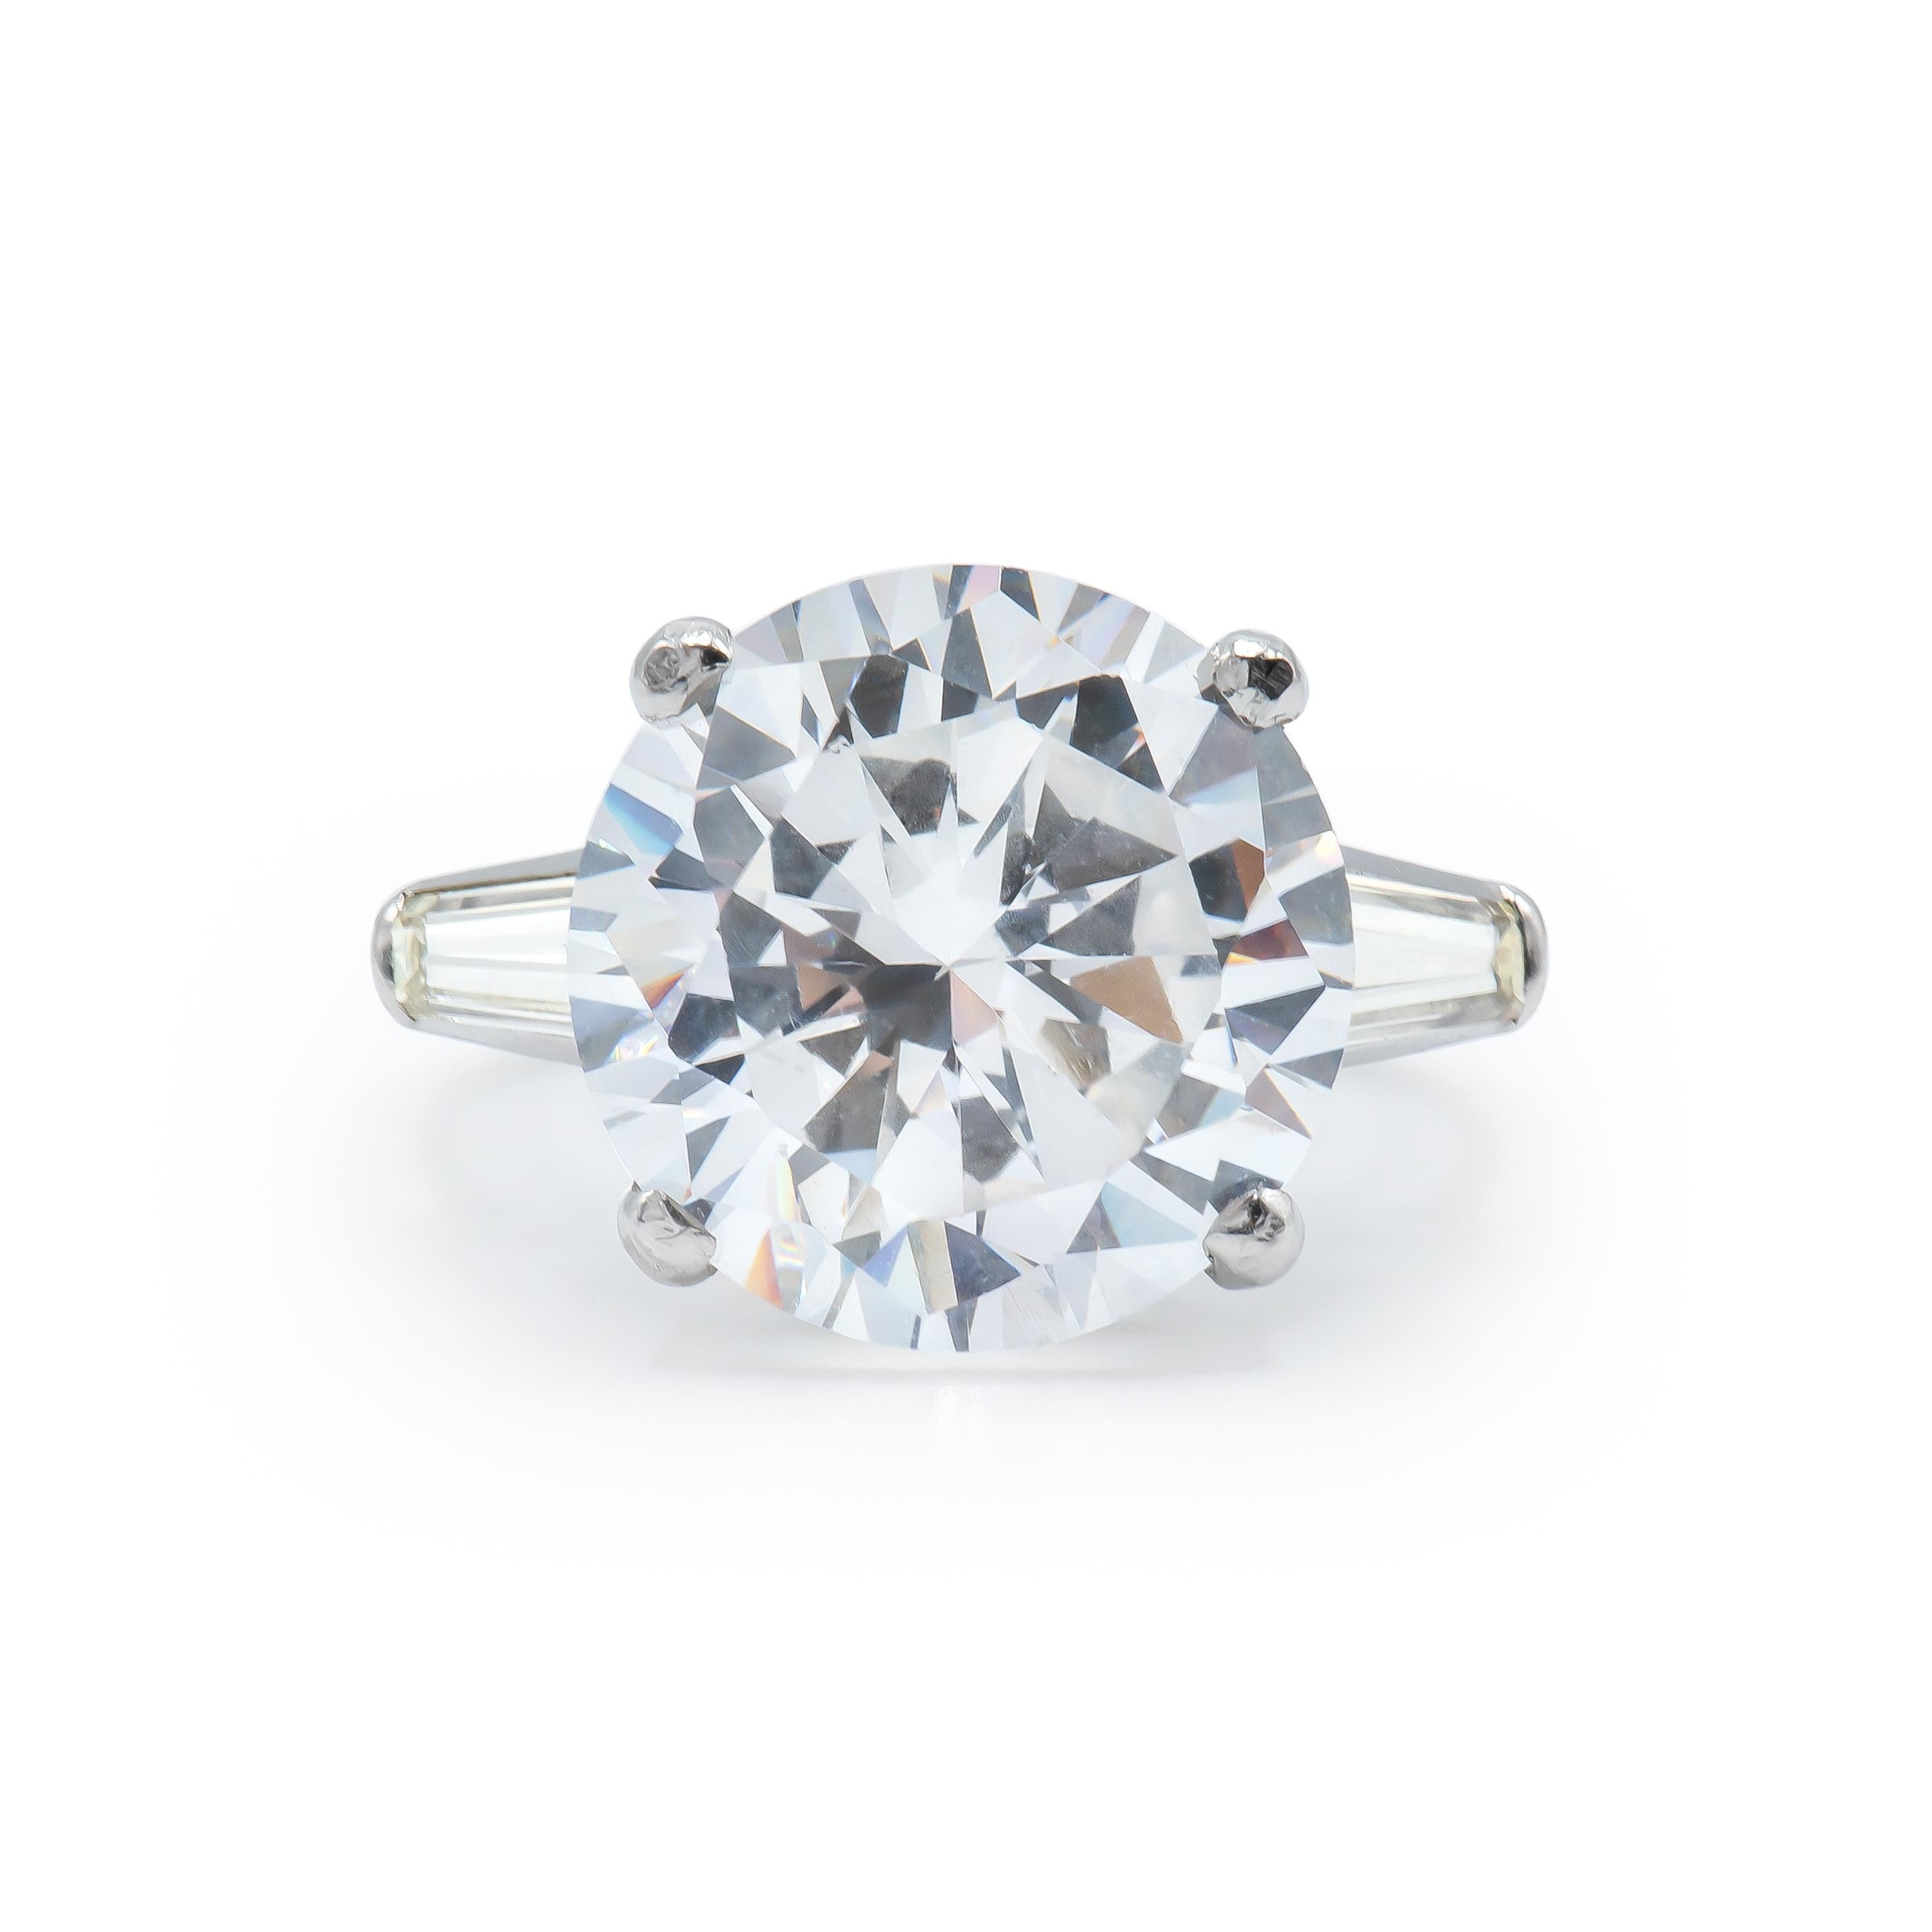 Round Diamond weighing 15.5 Carats, flanked by Tapered Baguette shaped Diamonds and set in Platinum.
Beautiful proportions and great life to this Diamond
Diamond is certified by GIA. K color. VS2 clarity
Set in Platinum.
Size 6.

Style available in